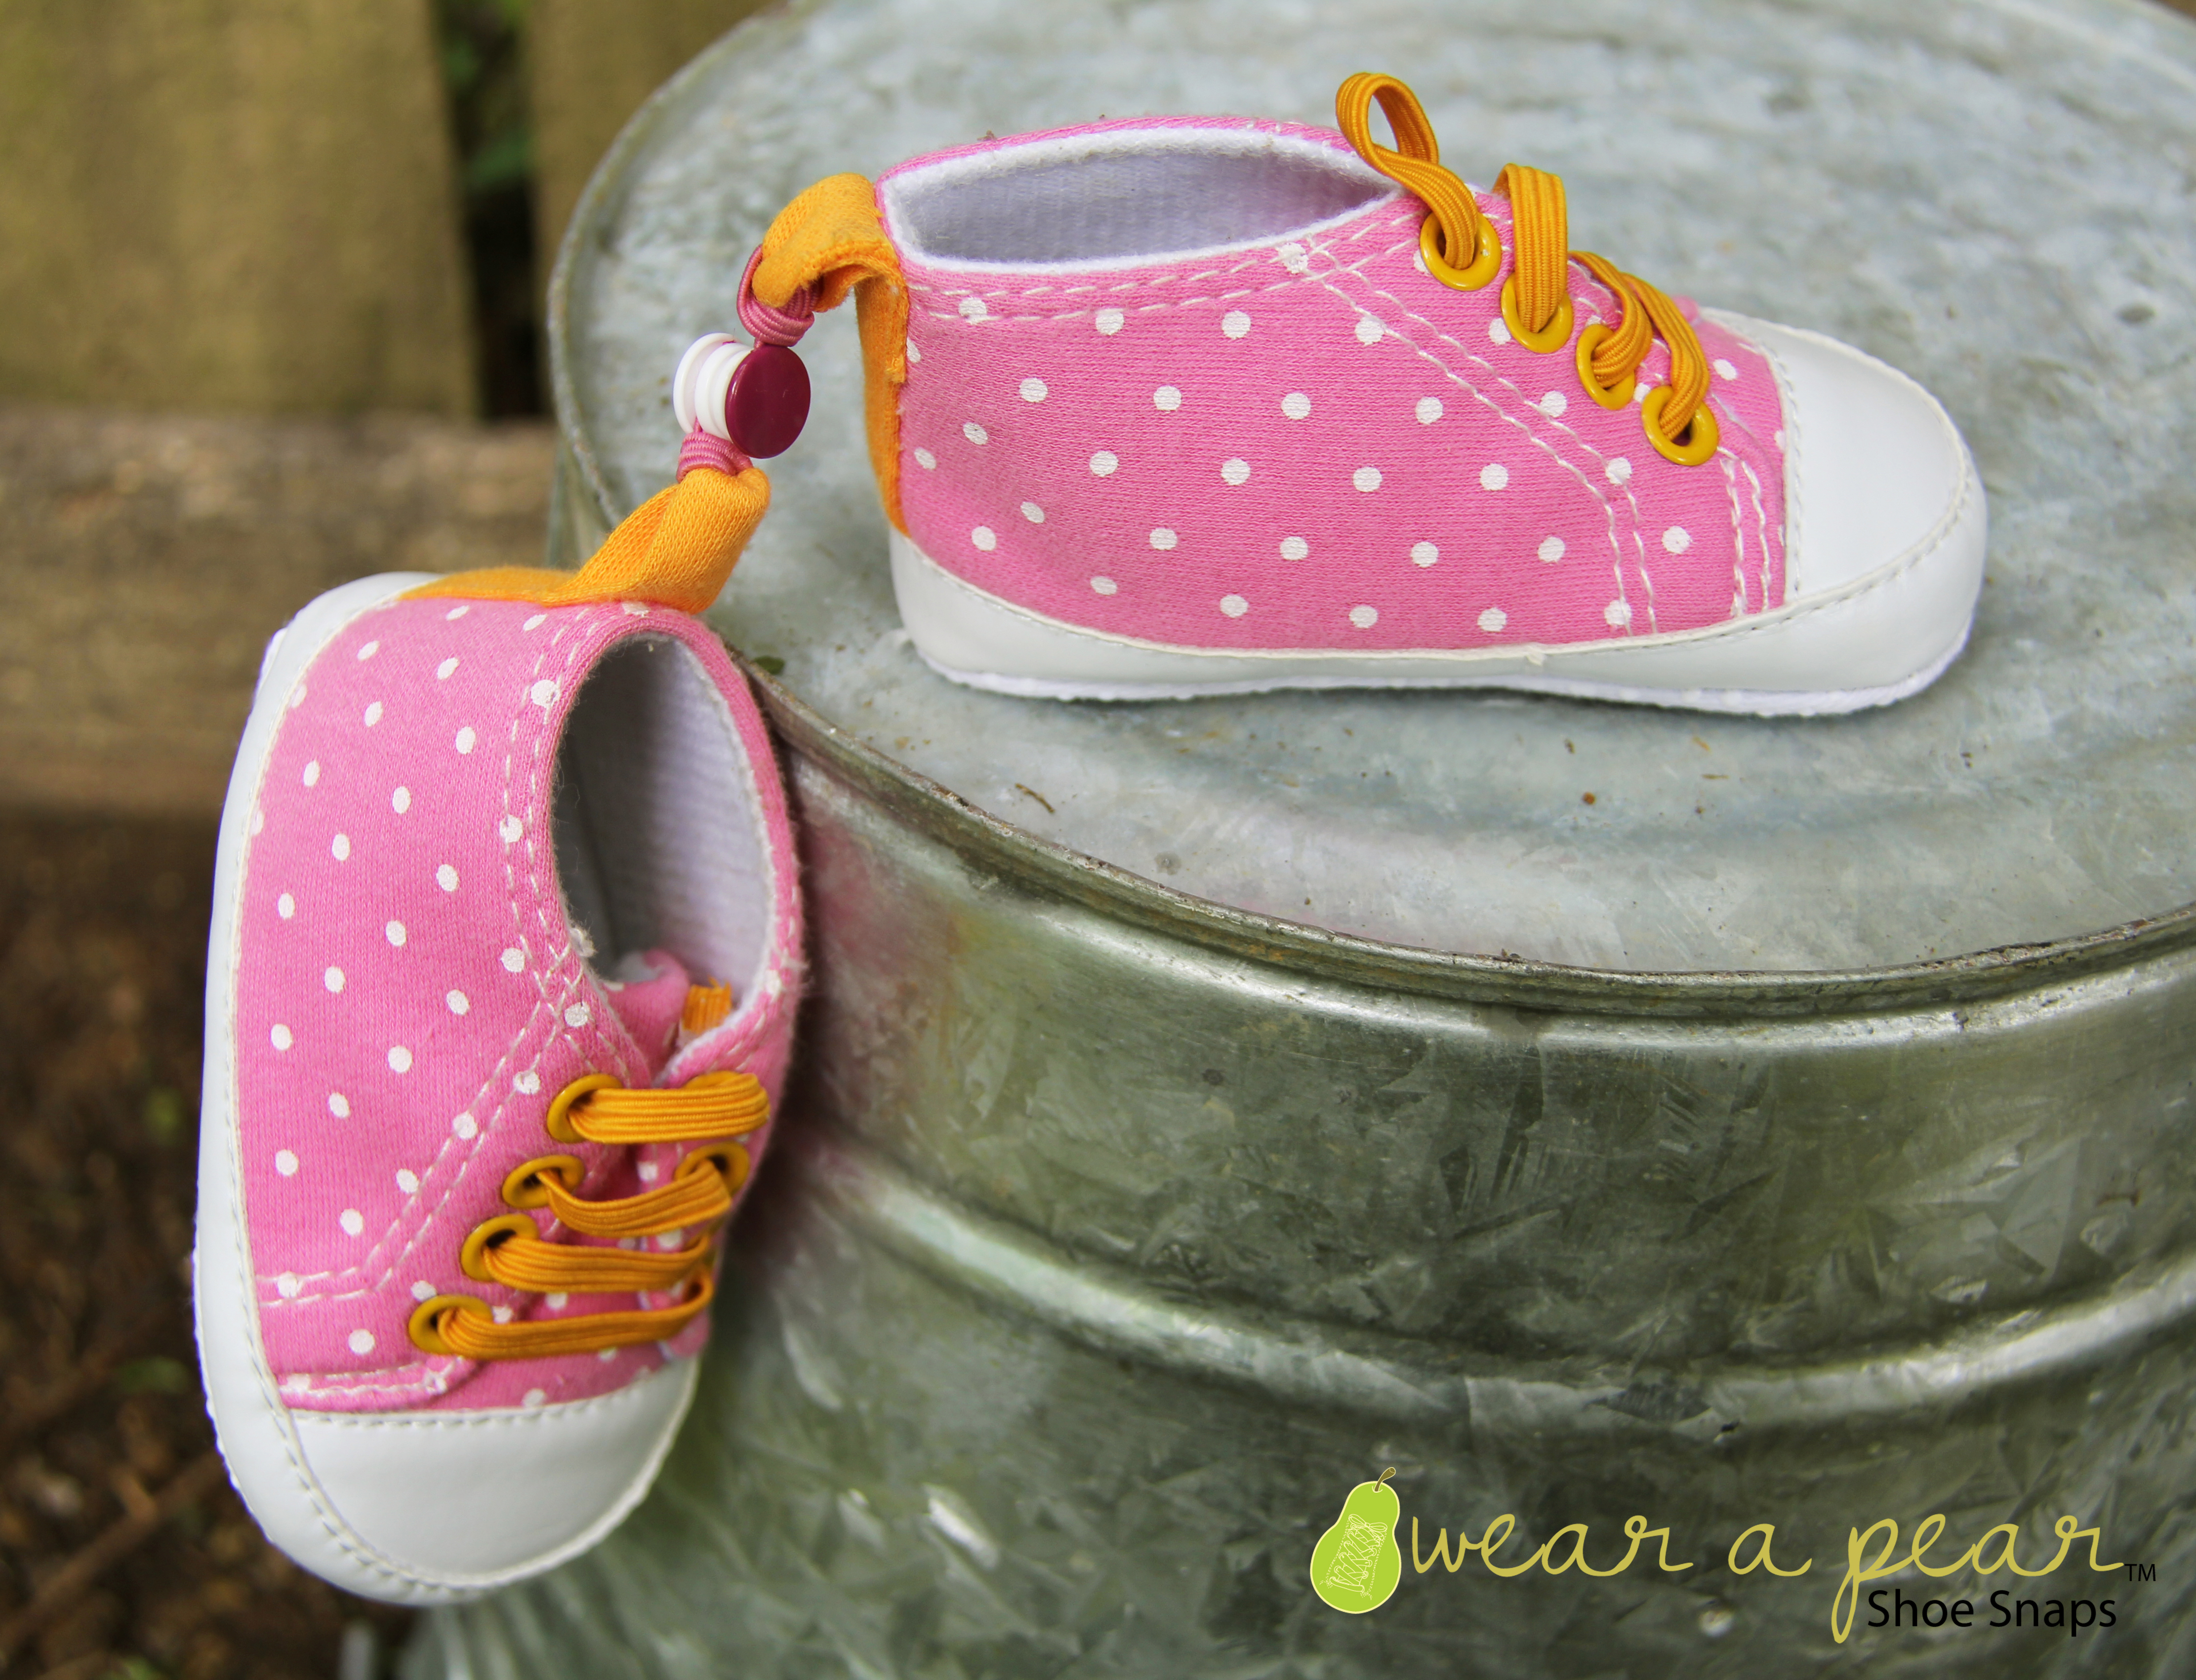 wear a pear shoe snaps keep kid shoes organized closet school baby gift